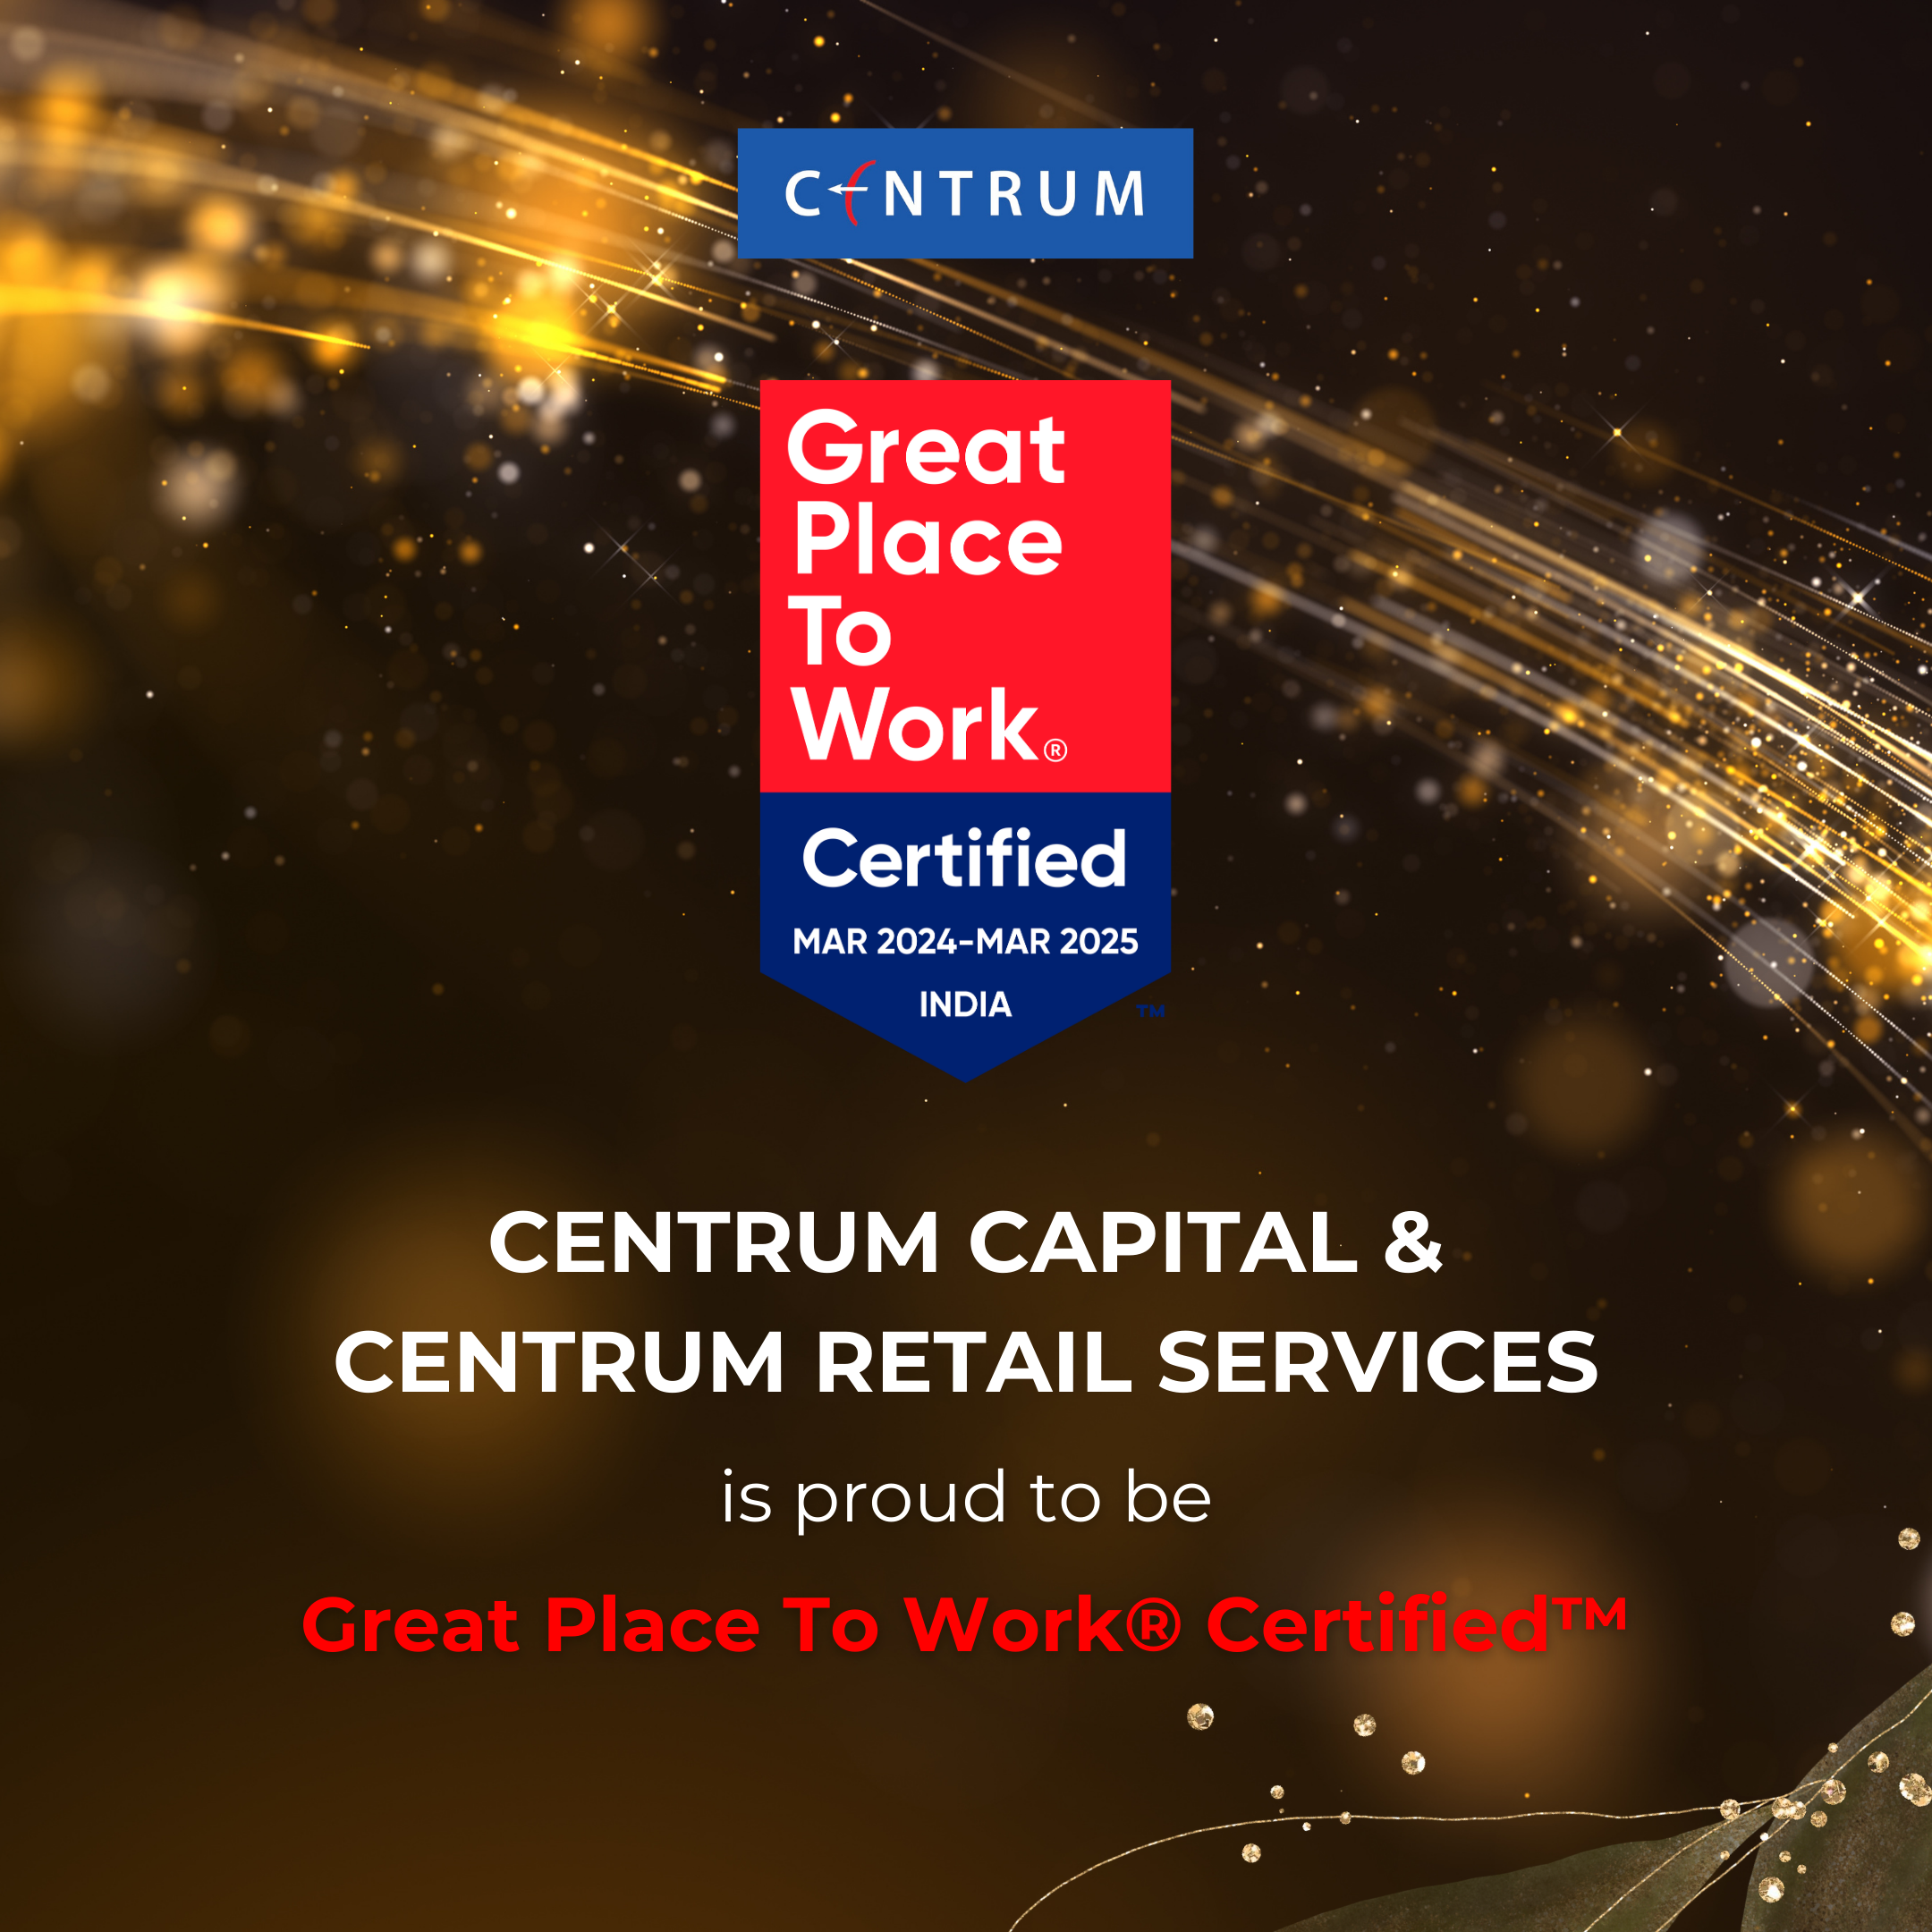 Centrum is now a Great Place to Work Certified!